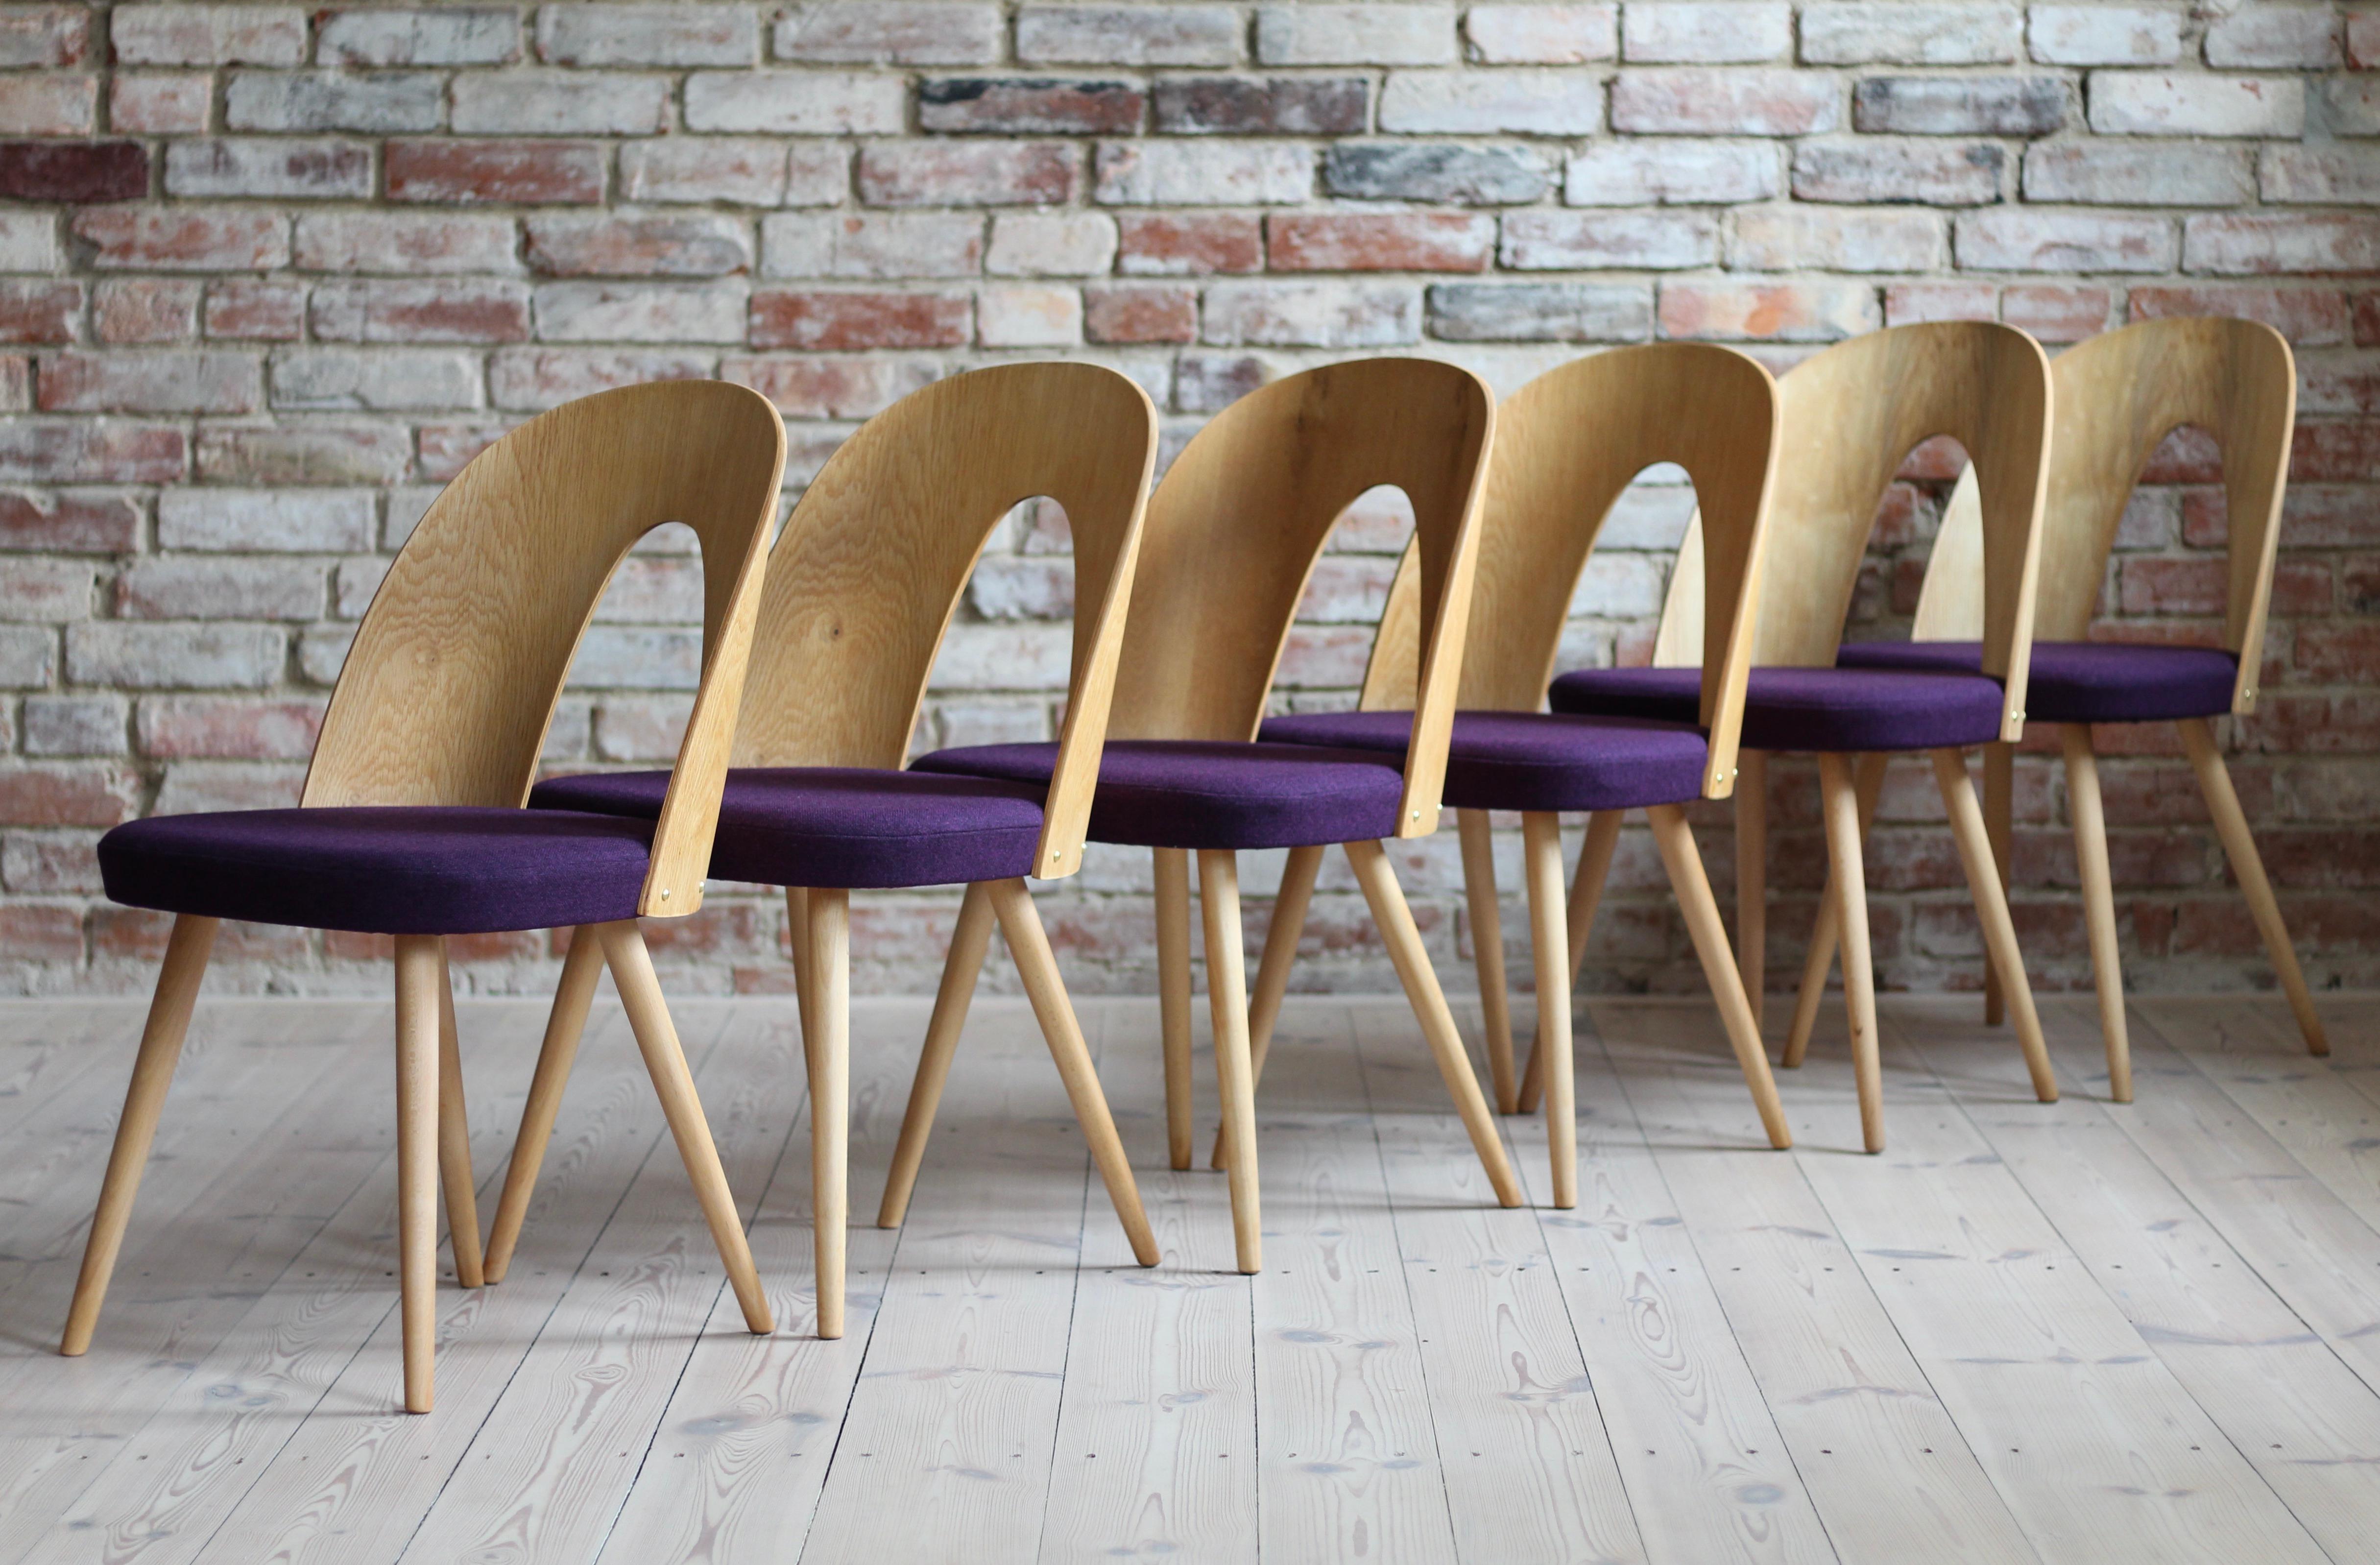 This set of twelve vintage dining chairs was designed by Czech designer Antonin Šuman in the 1960s. The chairs have been completely restored finished with high-quality oil that gave them beautiful and natural finish. This set is reupholstered with